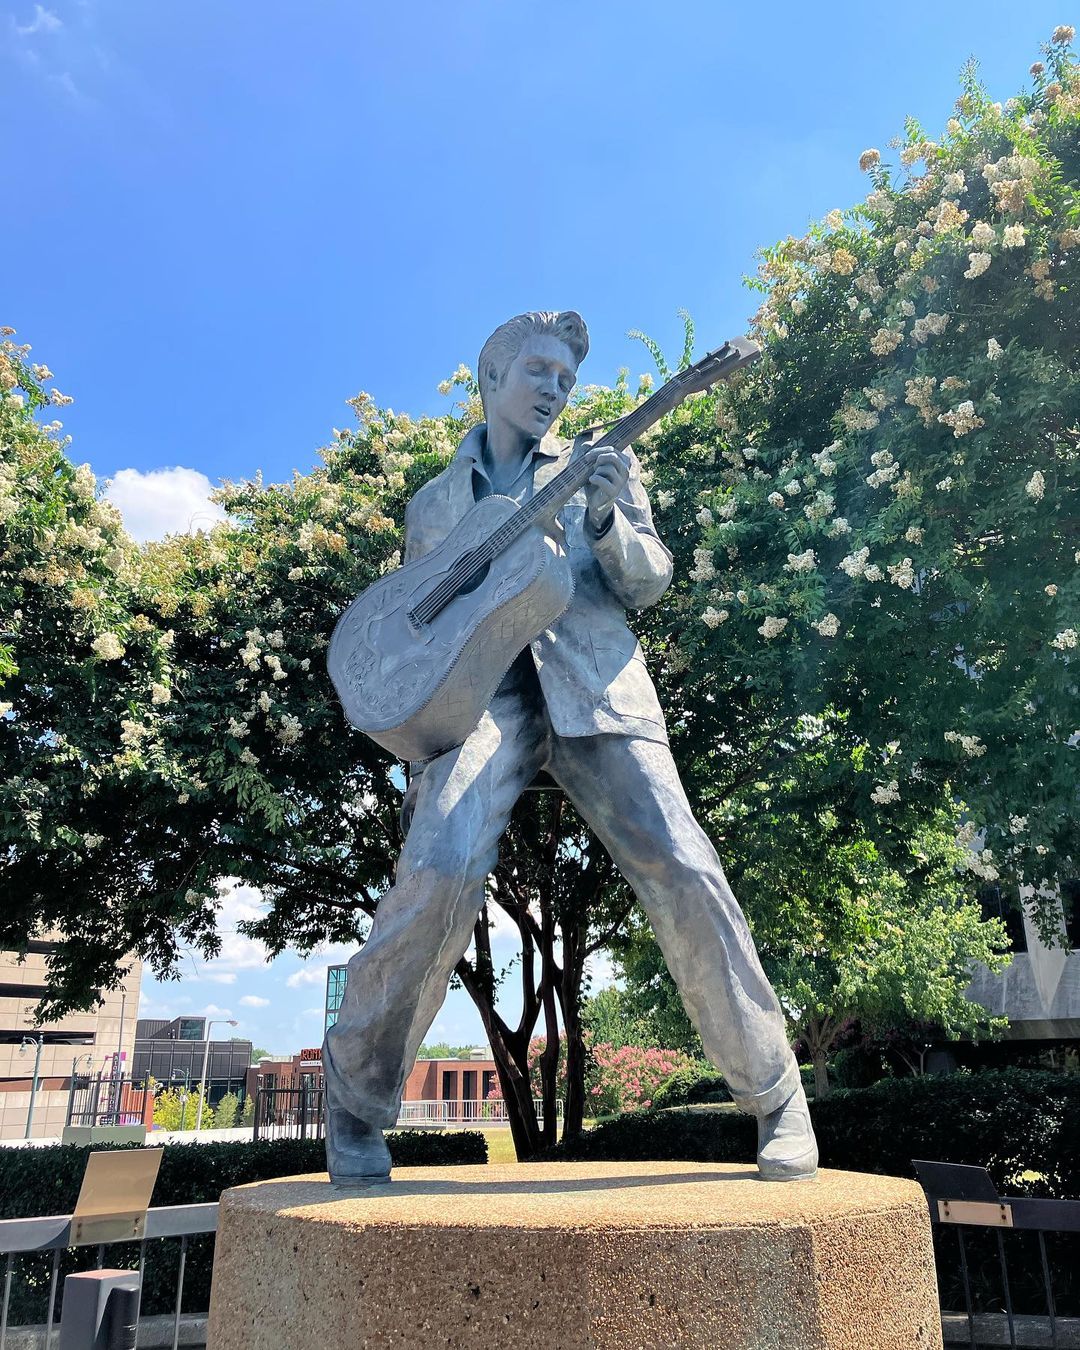 Gray elvis statue posed with a guitar on concrete pedestal surrounded by blooming trees in Memphis. Photo by Instagram user @ladytontour